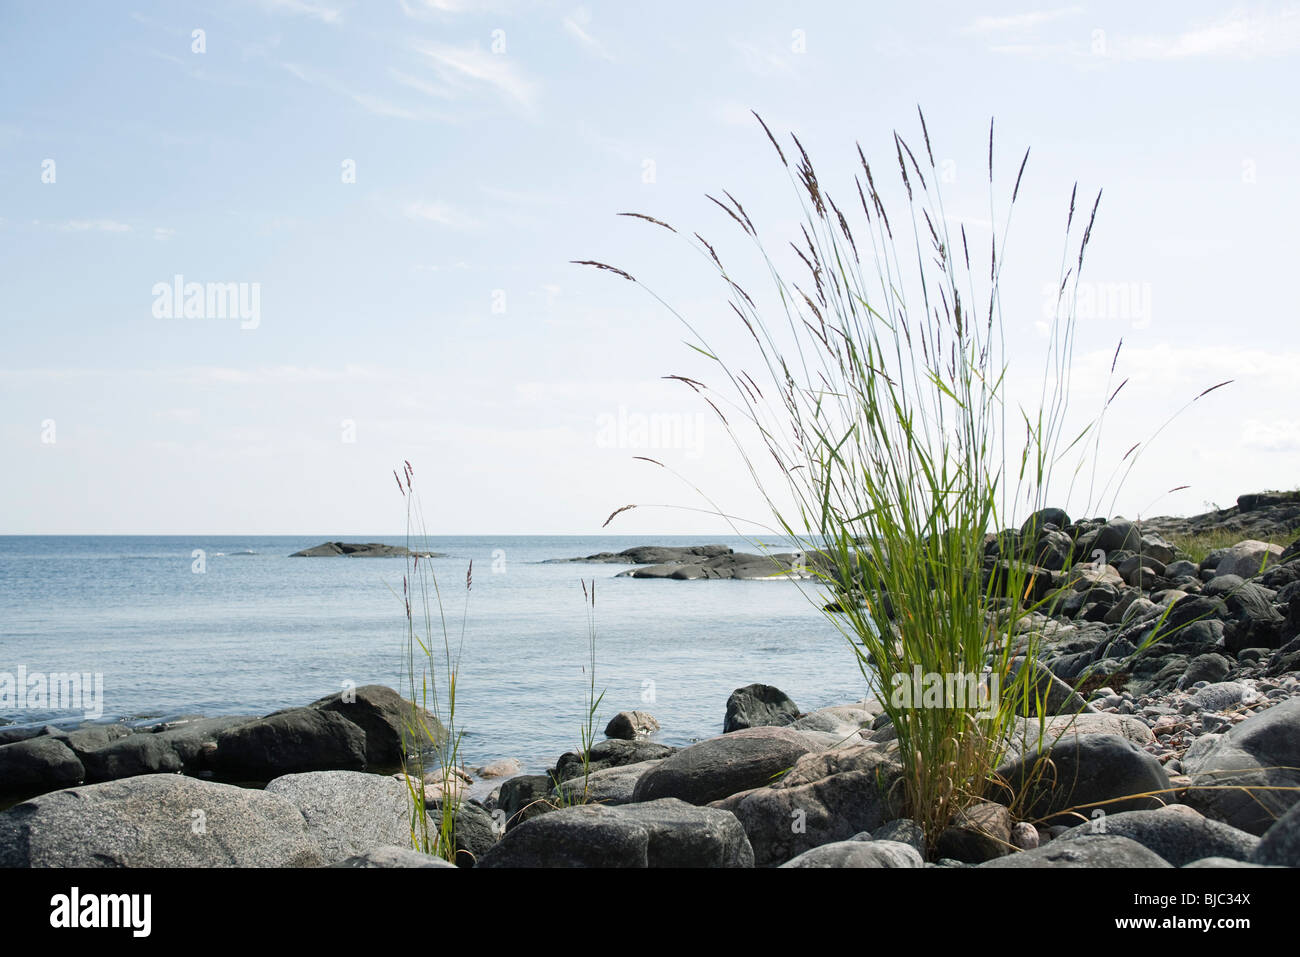 Tall grass growing on rocky shore Stock Photo